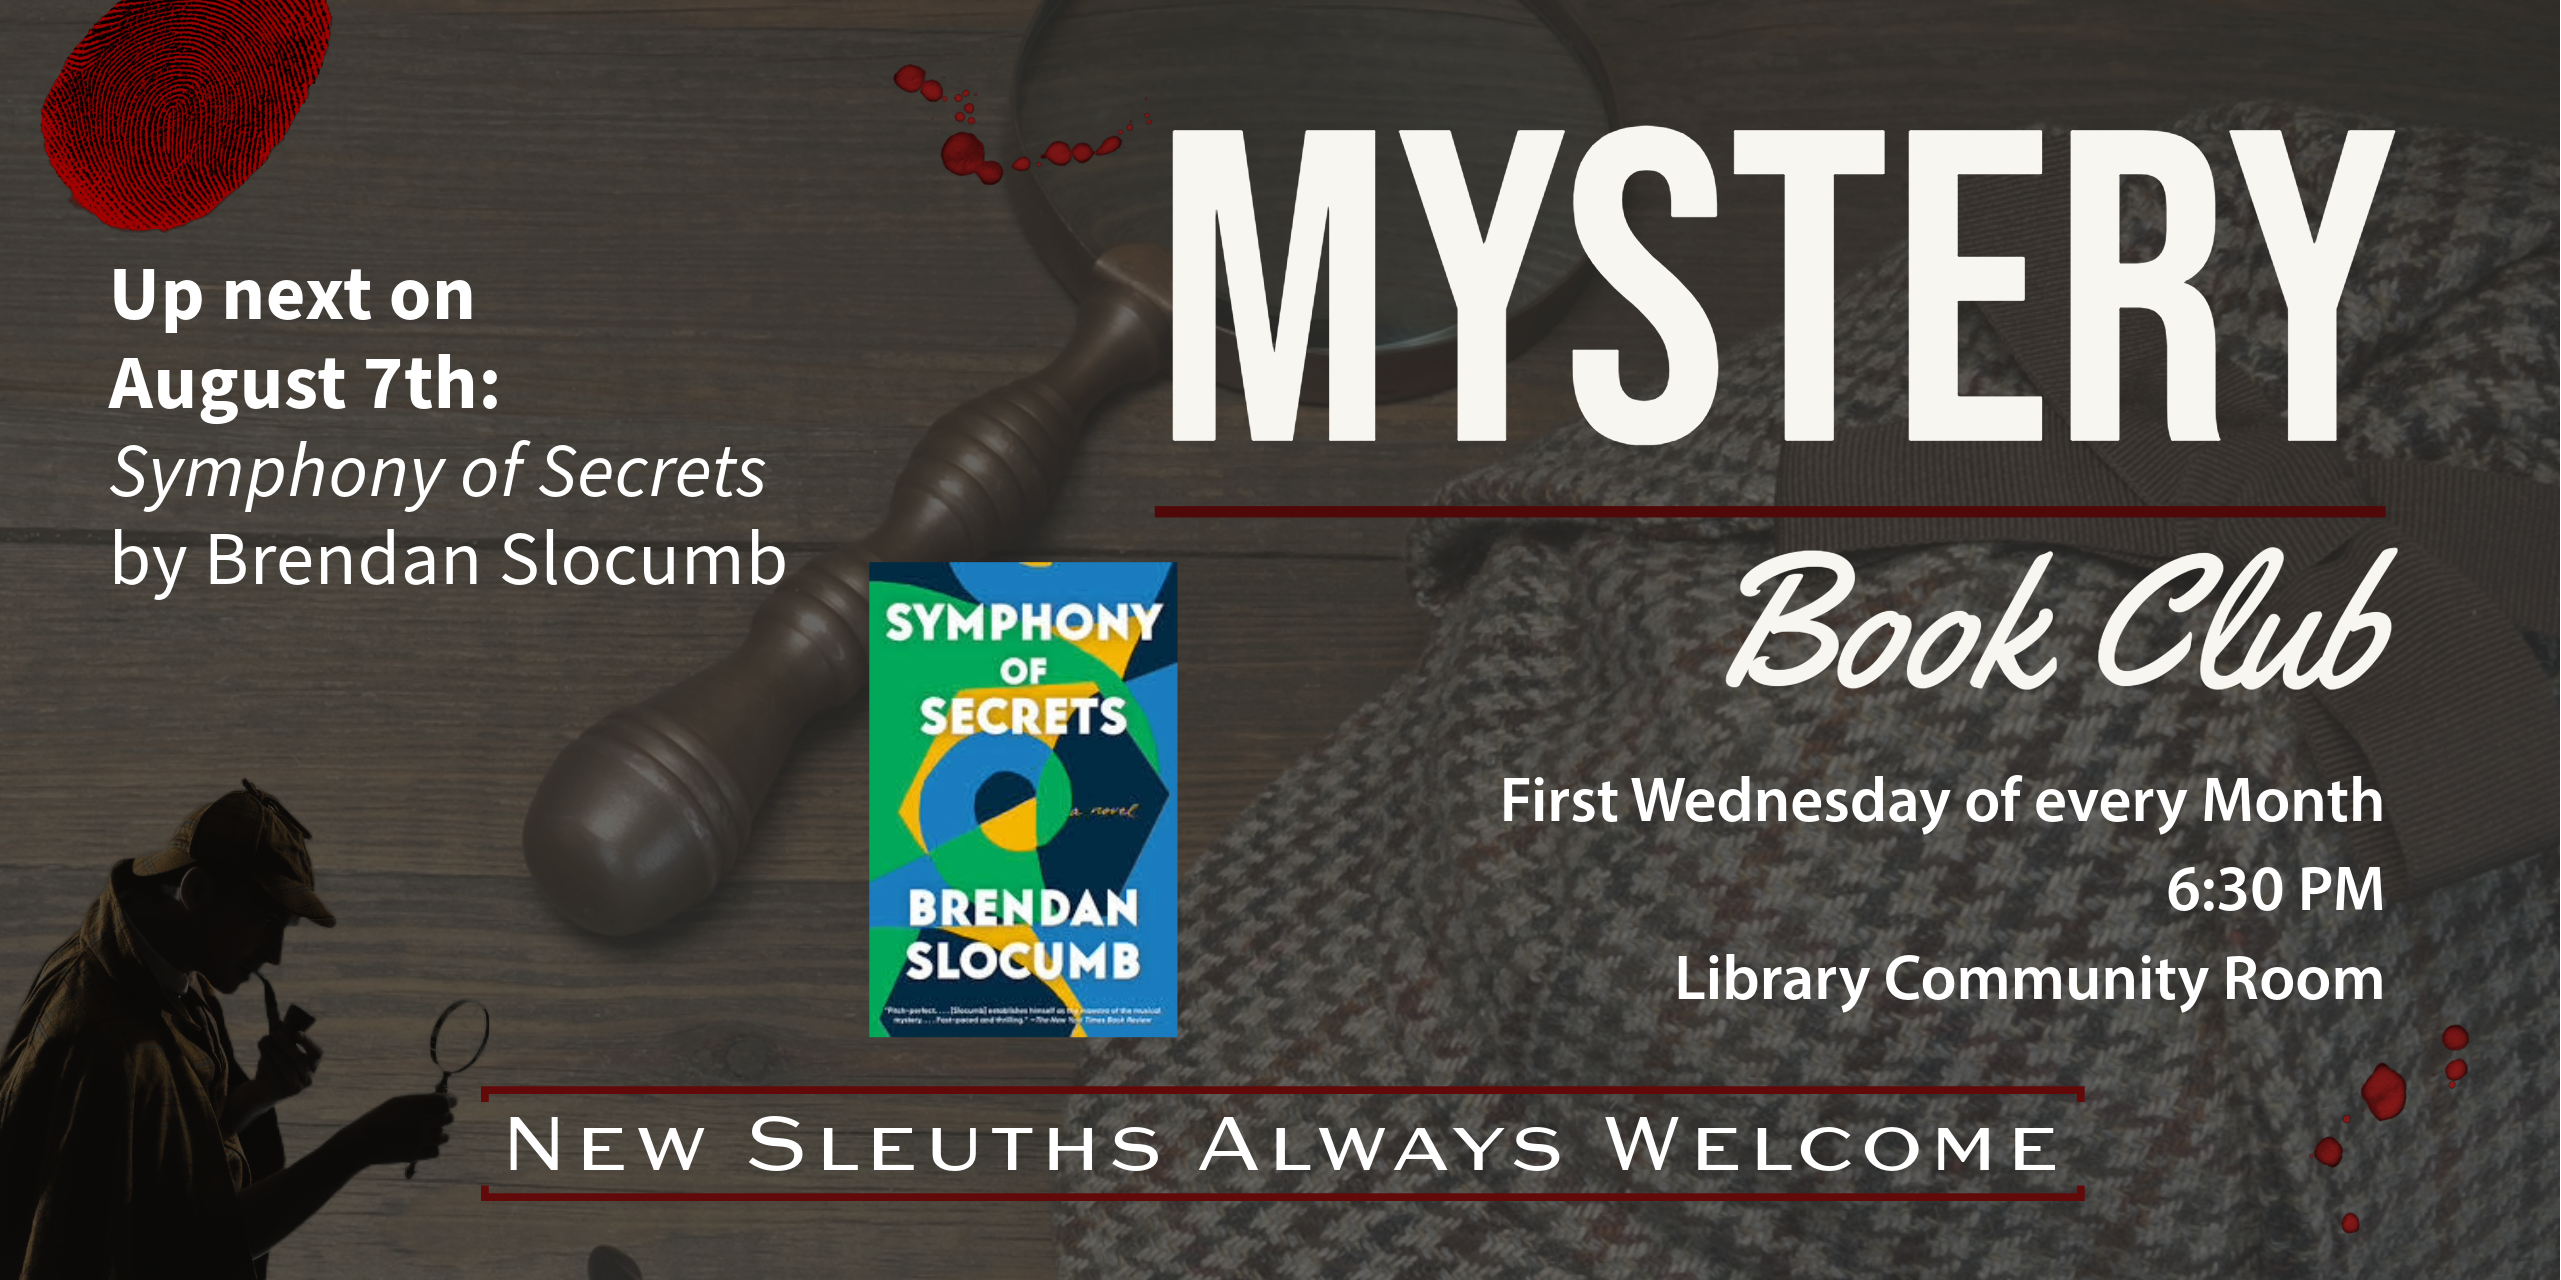 Join us on the first Wednesday of the month at 6:30 PM for mystery book discussions! We meet in the library community room.  August 7th's selection is Symphony of Secrets by Brendan Slocumb.  Copies are available in the library.